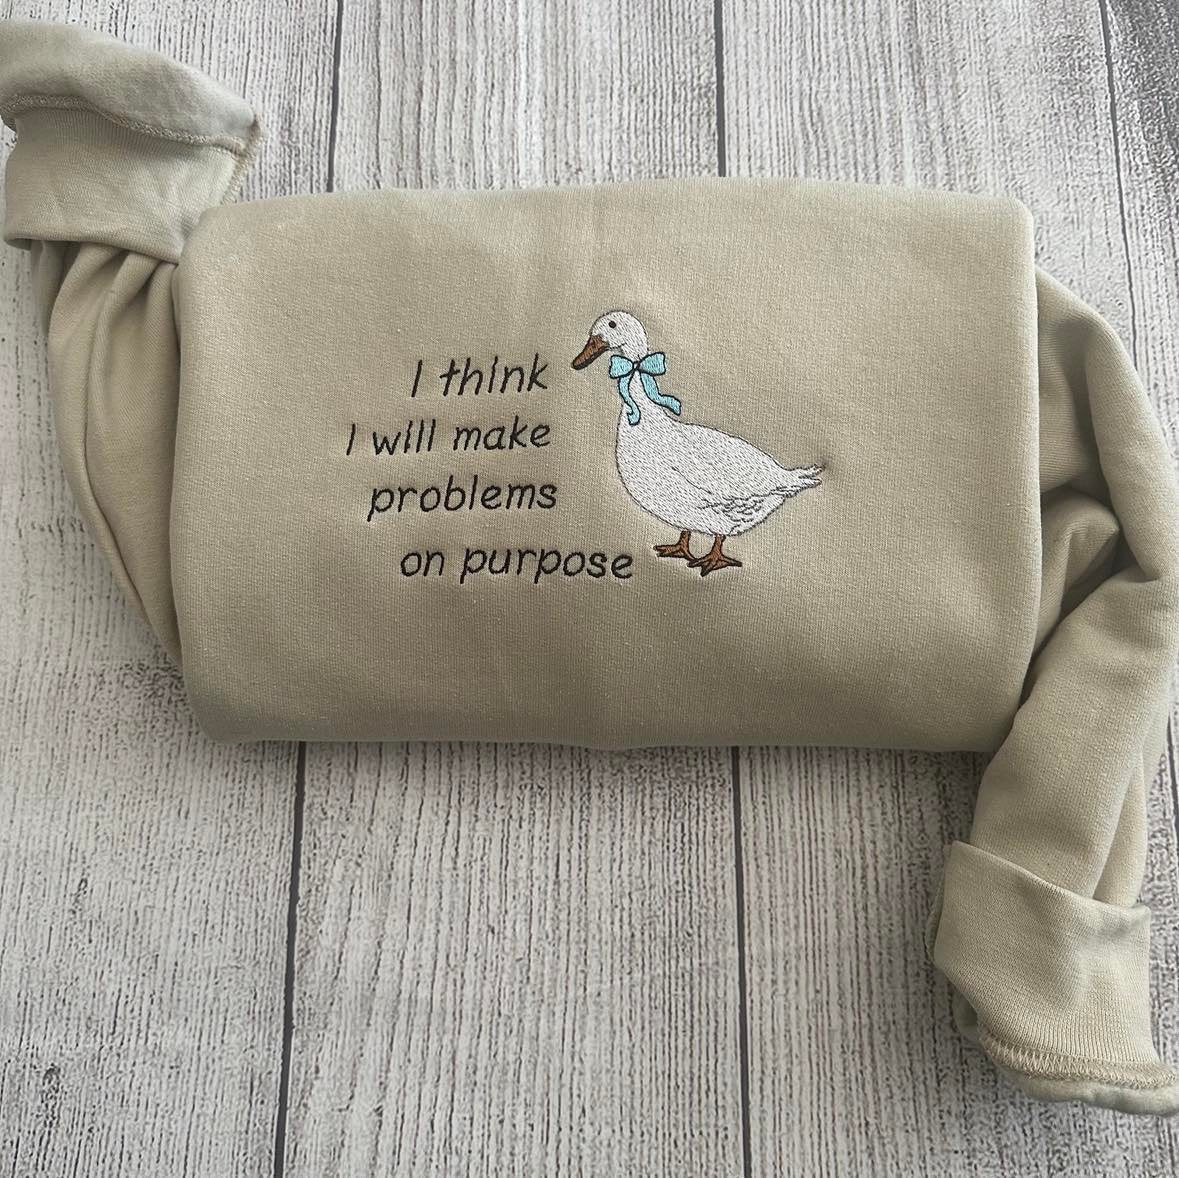 Embroidered Silly Goose  Sweatshirts; I think I will make problems on purpose  Embroidered crewneck;  gift for her goose sweatshirt